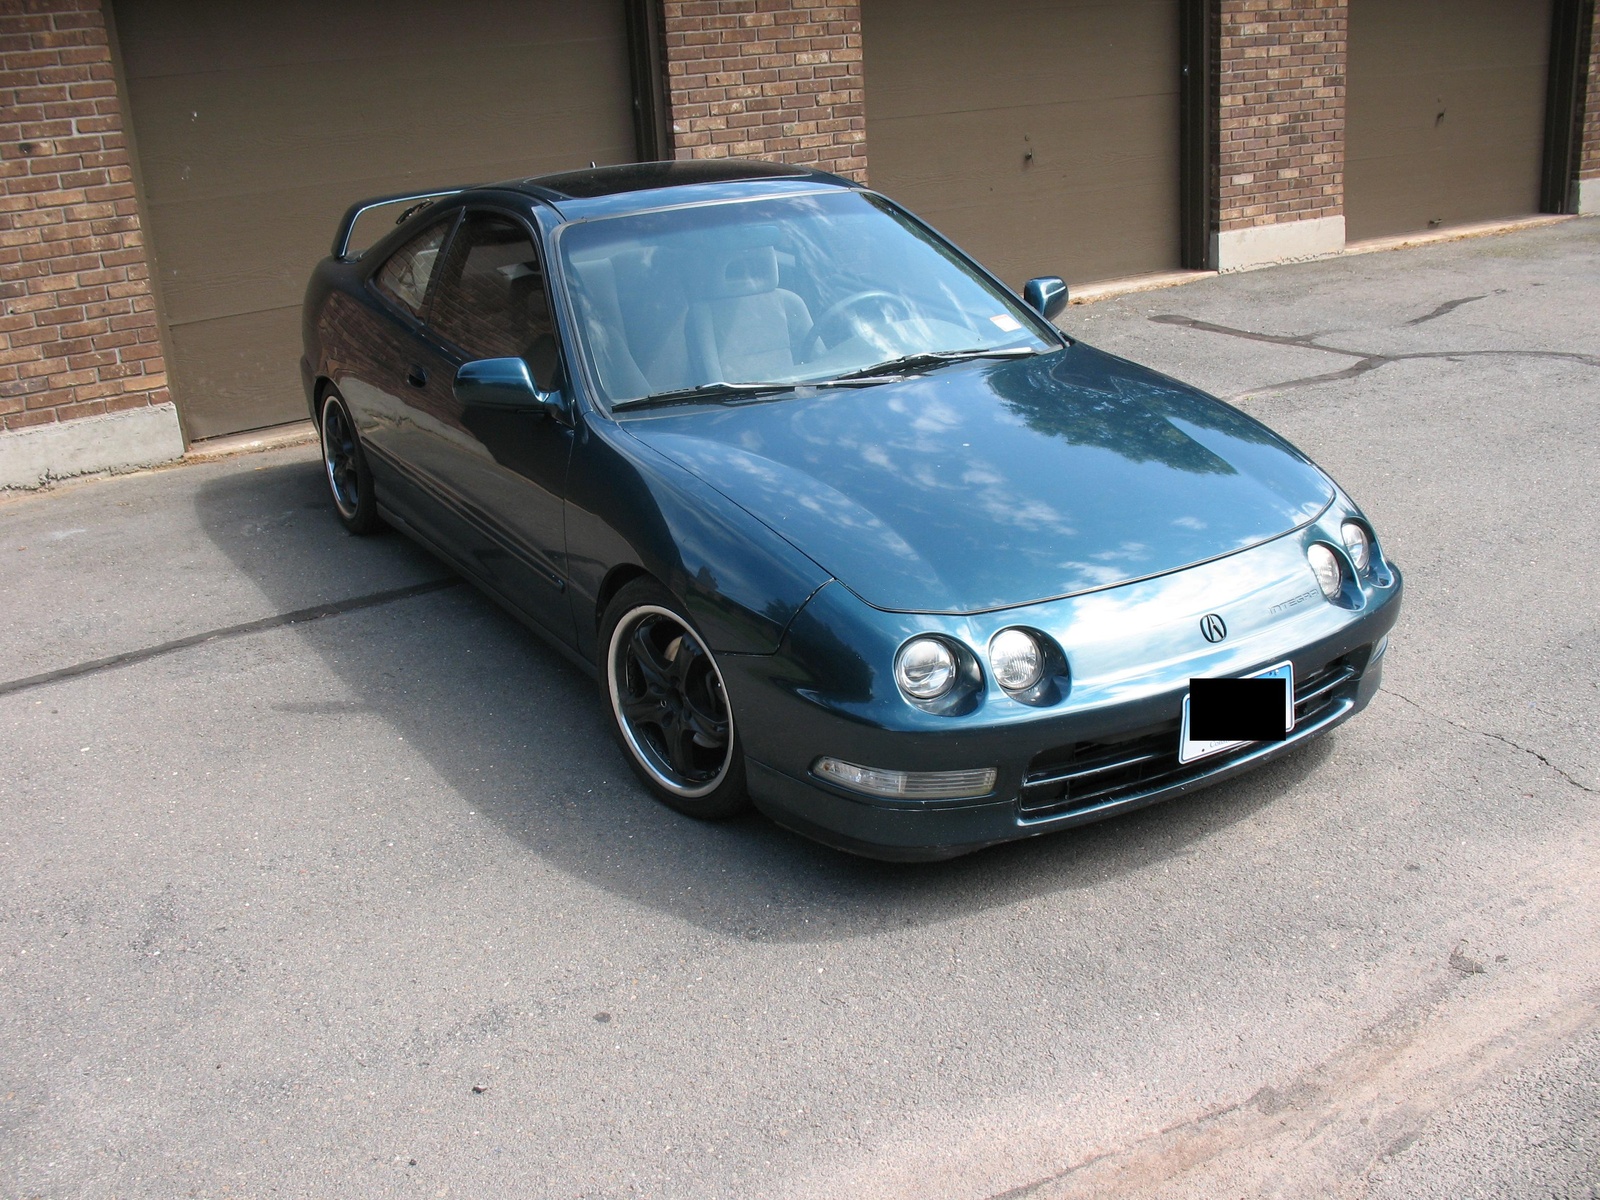 1996 Acura Integra 2 Dr LS Hatchback - Pictures - 1996 Acura ...